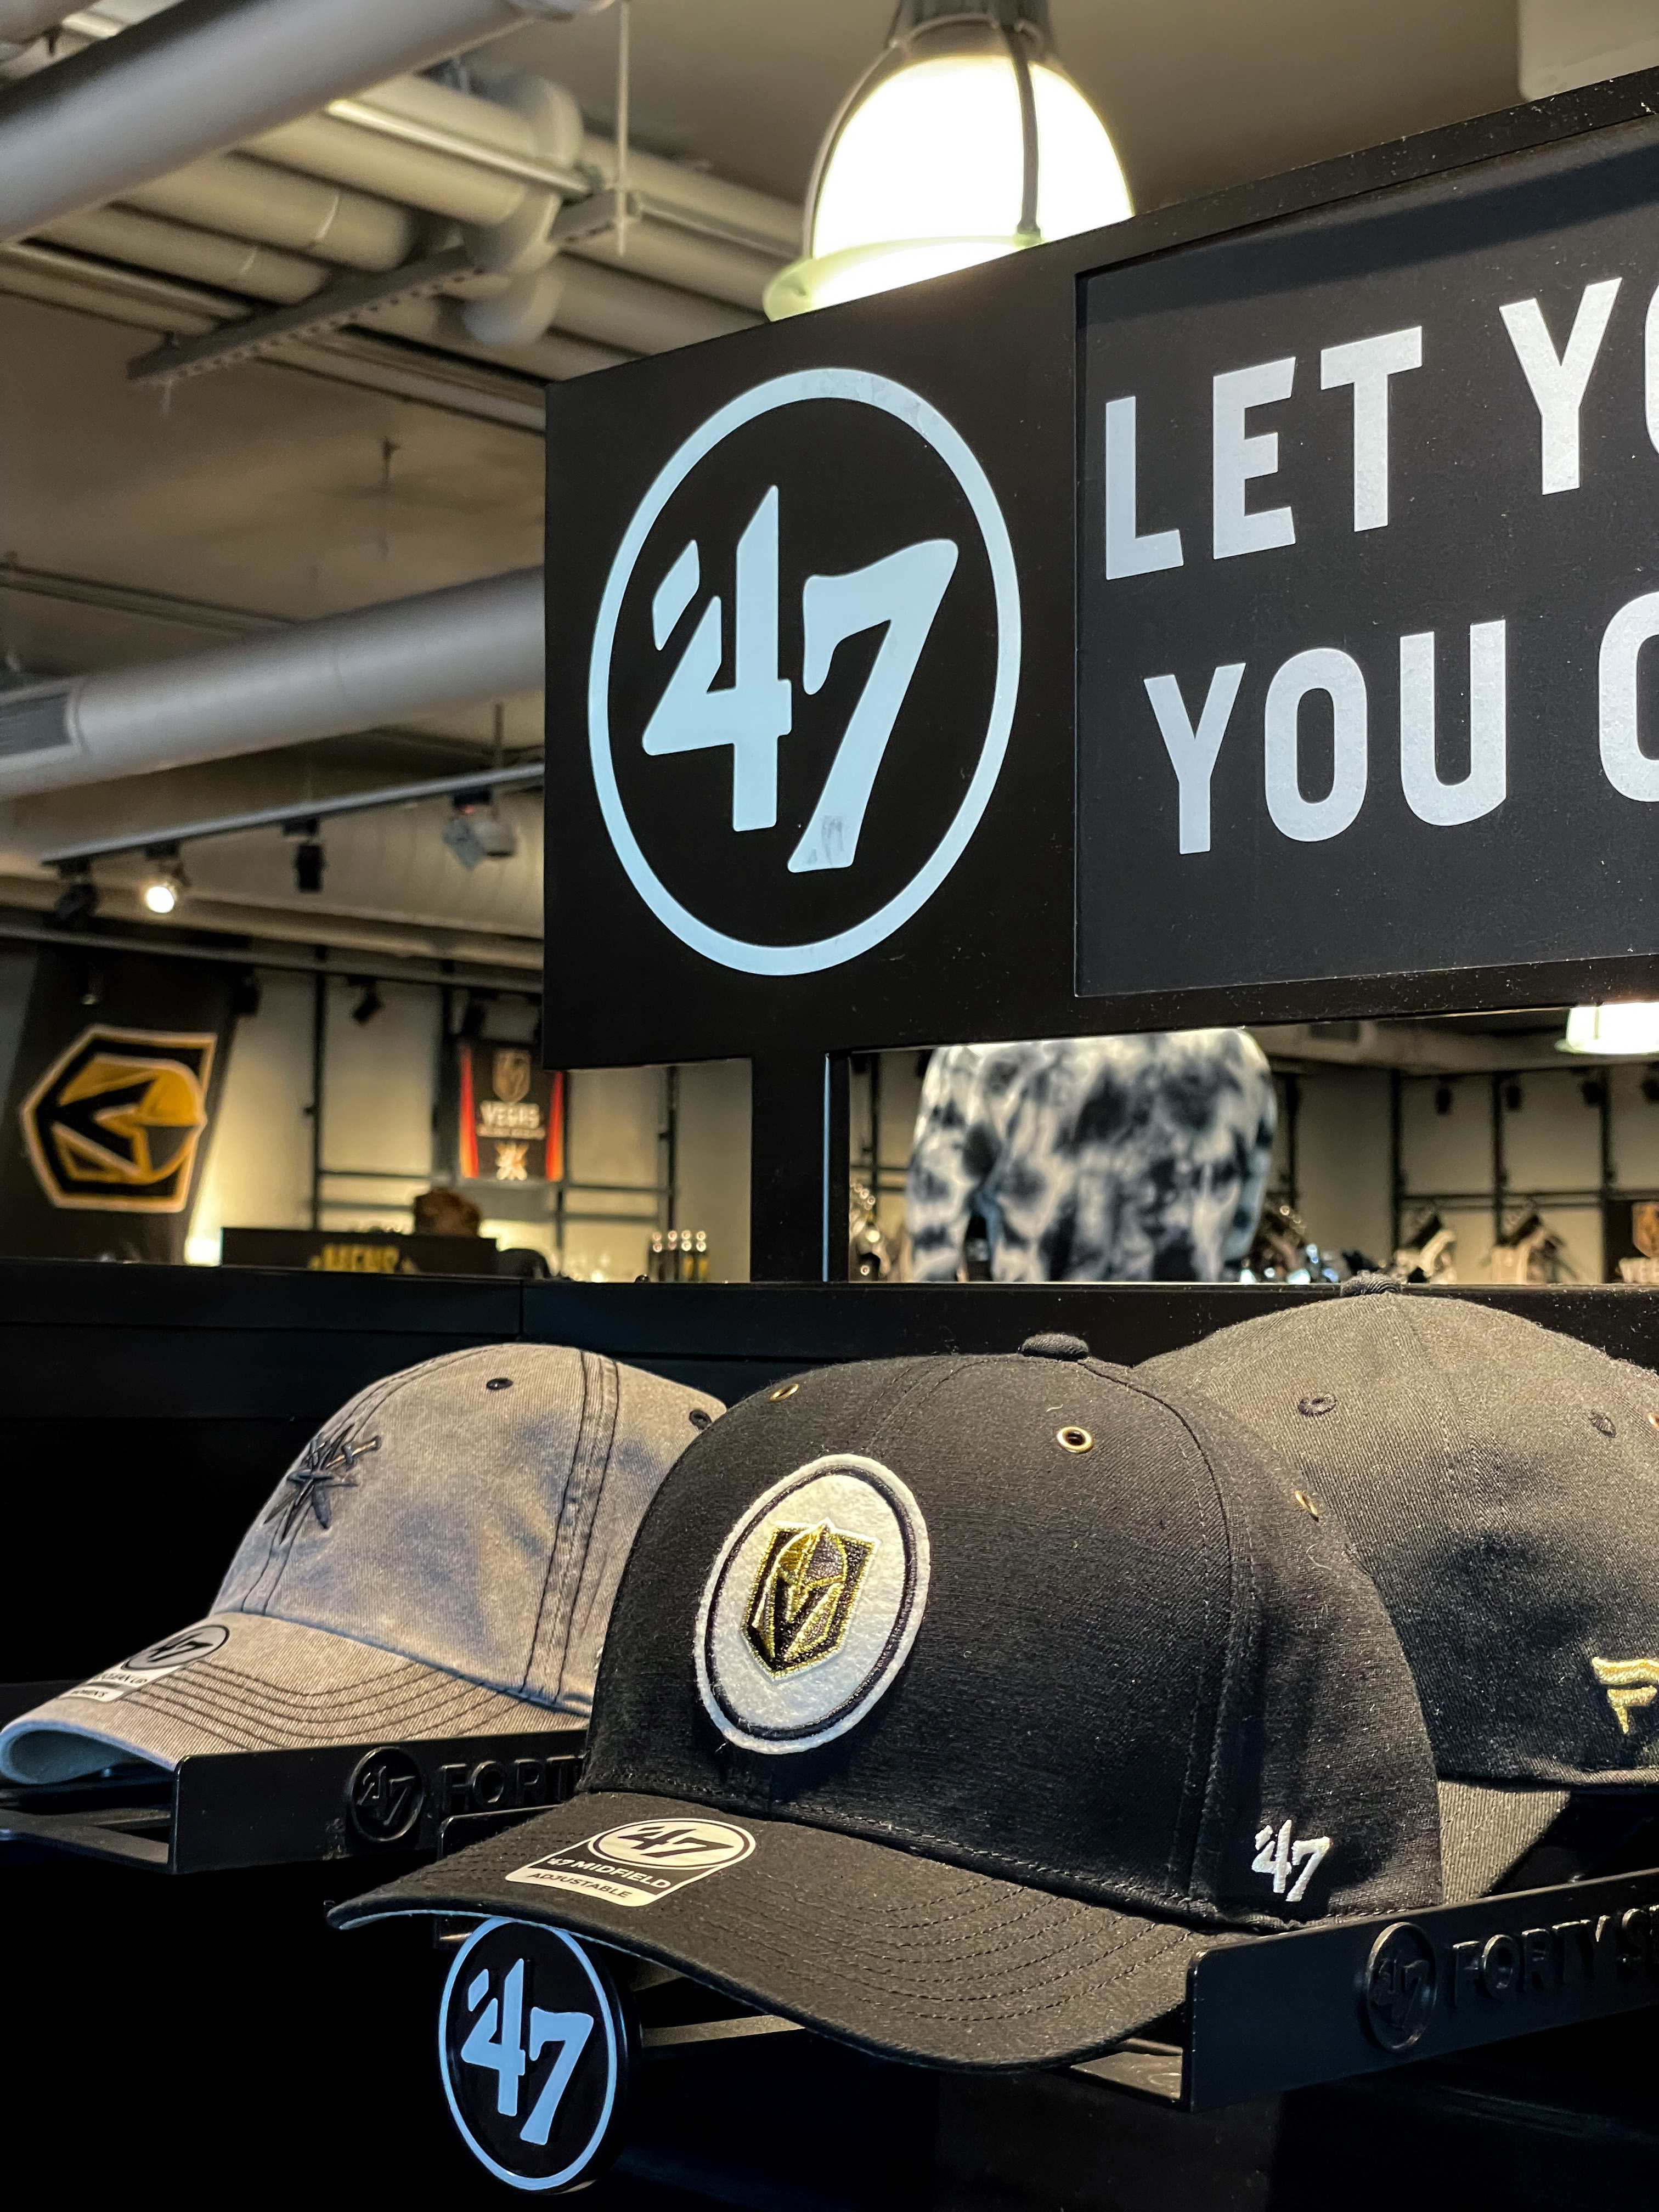 VEGAS GOLDEN KNIGHTS 🏒 Tour Of The VGK Armory Fan Store At T